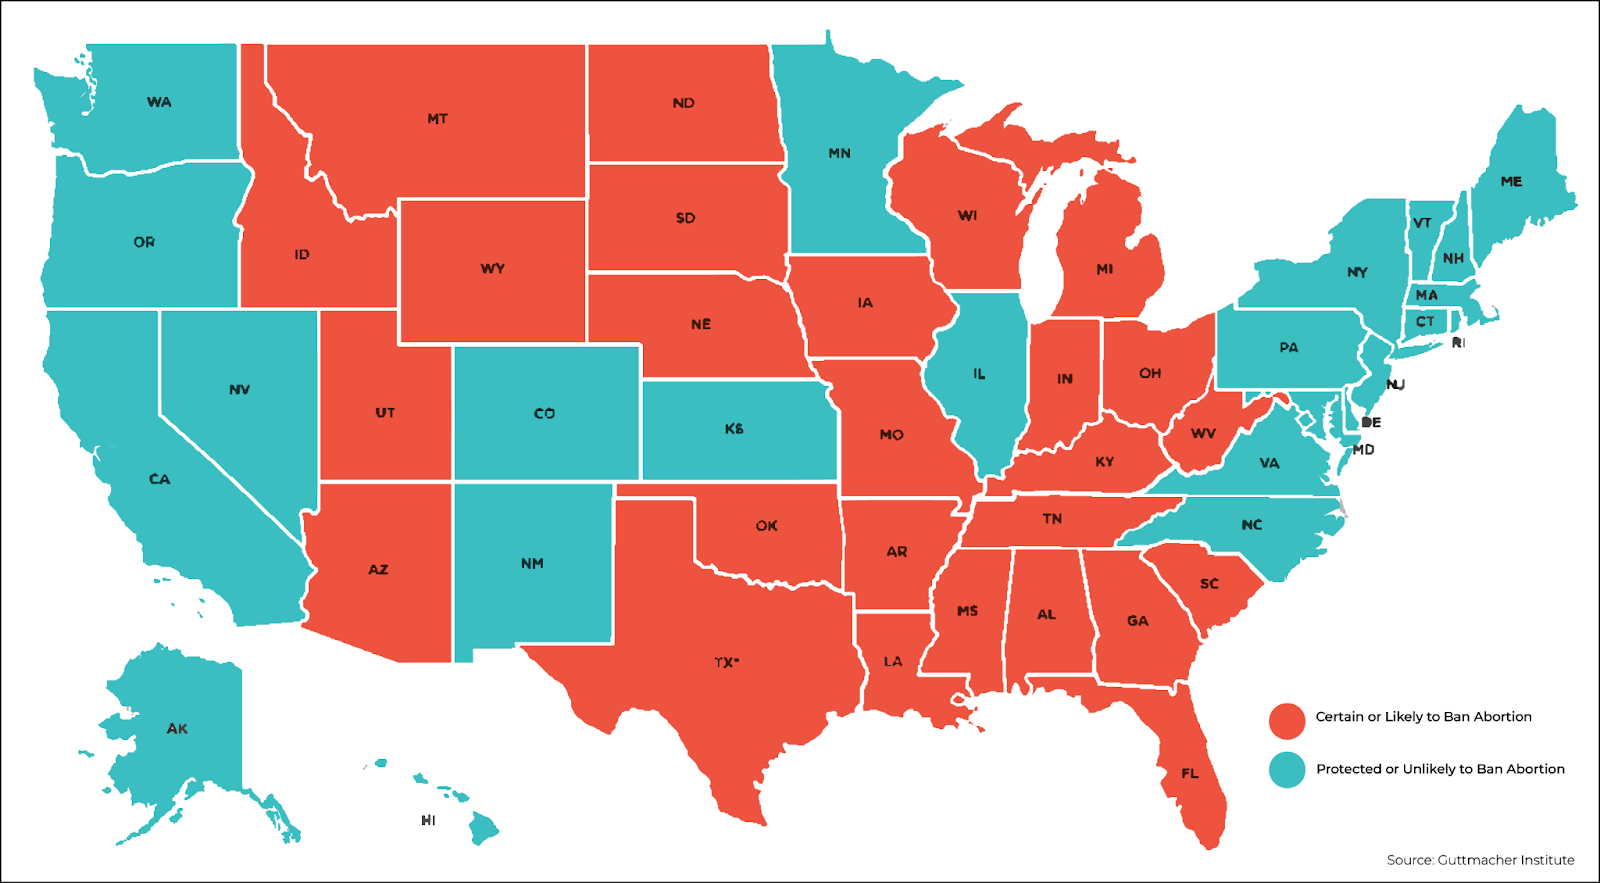 A map of the United States showing the 26 states certain or likely to ban abortion if Roe is overturned. The ban states are shown in orange. The other states are shown in blue. The source is the Guttmacher Institute. 